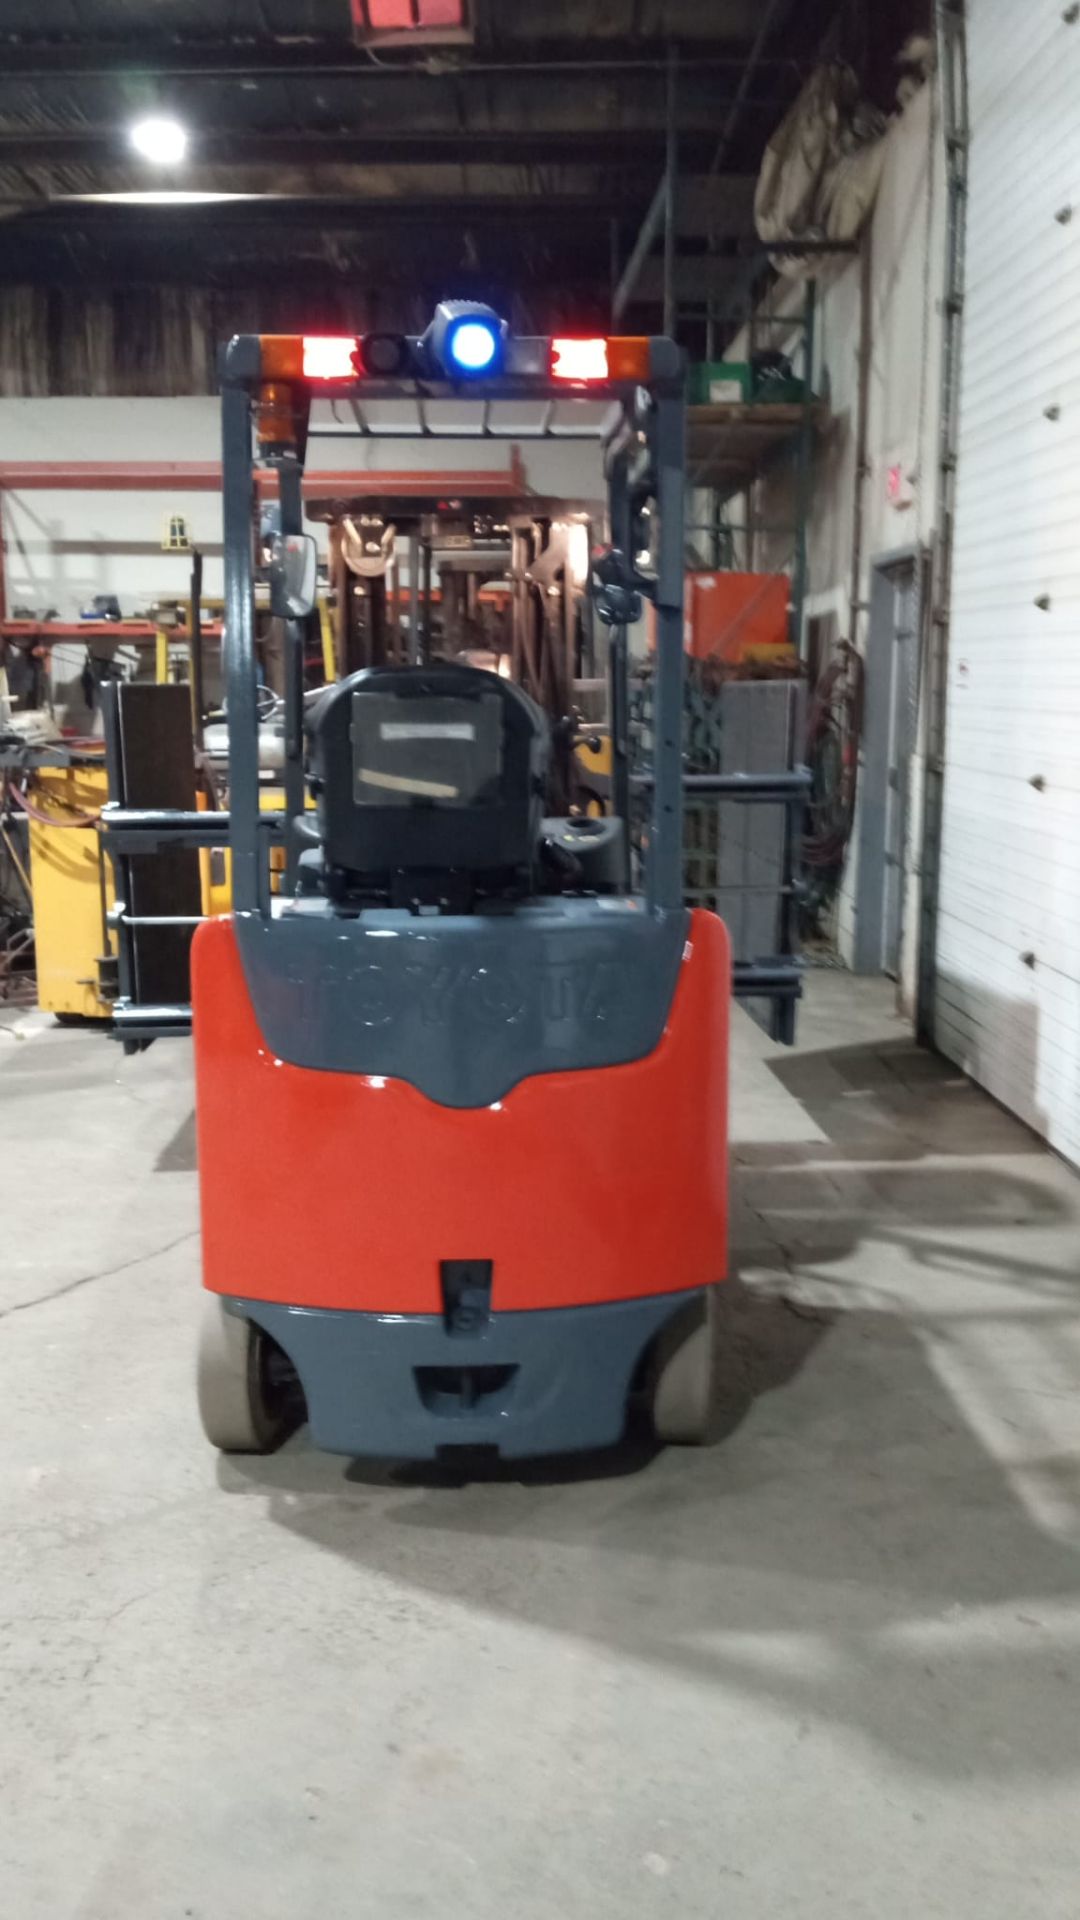 2016 Toyota 5,000lbs Capacity Electric Forklift 48V with LORON CLAMP & 3-STAGE MAST & Non Marking - Image 9 of 11